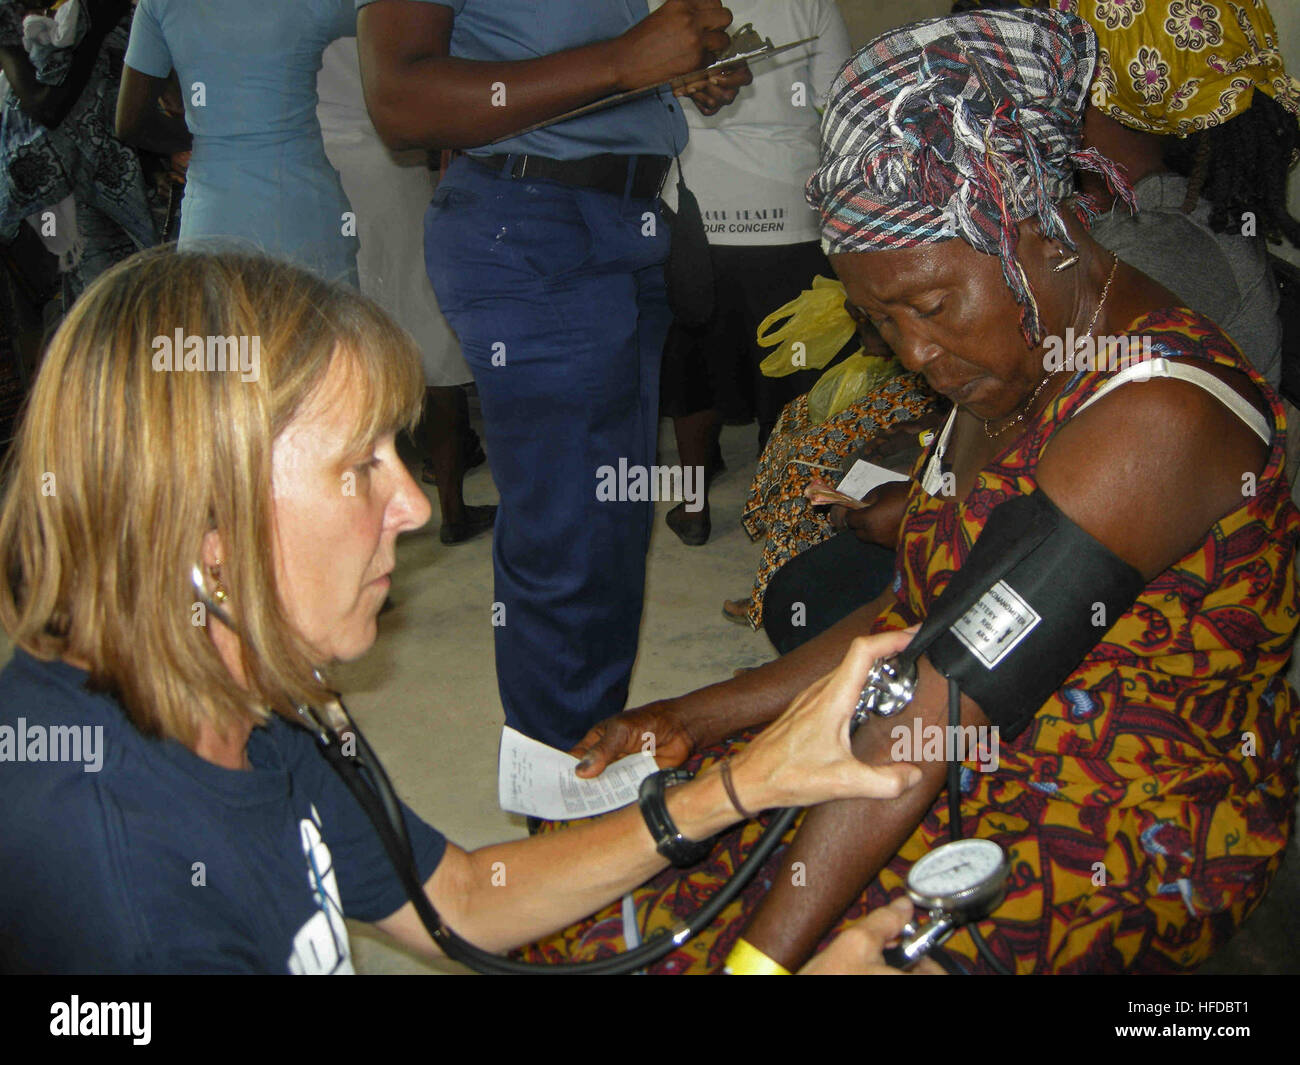 Fran Bauer, a volunteer nurse from Project Hope, checks a patient's vitals during a medical outreach health fair in support of Africa Partnership Station (APS) 2012 hosted by Ghanaian and American medical personnel from High-Speed Vessel Swift (HSV 2). APS is an international security cooperation initiative, facilitated by Commander, U.S. Naval Forces Europe-Africa, aimed at strengthening global maritime partnerships through training and collaborative activities in order to improve maritime safety and security in Africa. (U.S. Navy photo by Ensign Joe Keiley/Released). Africa Partnership Stati Stock Photo